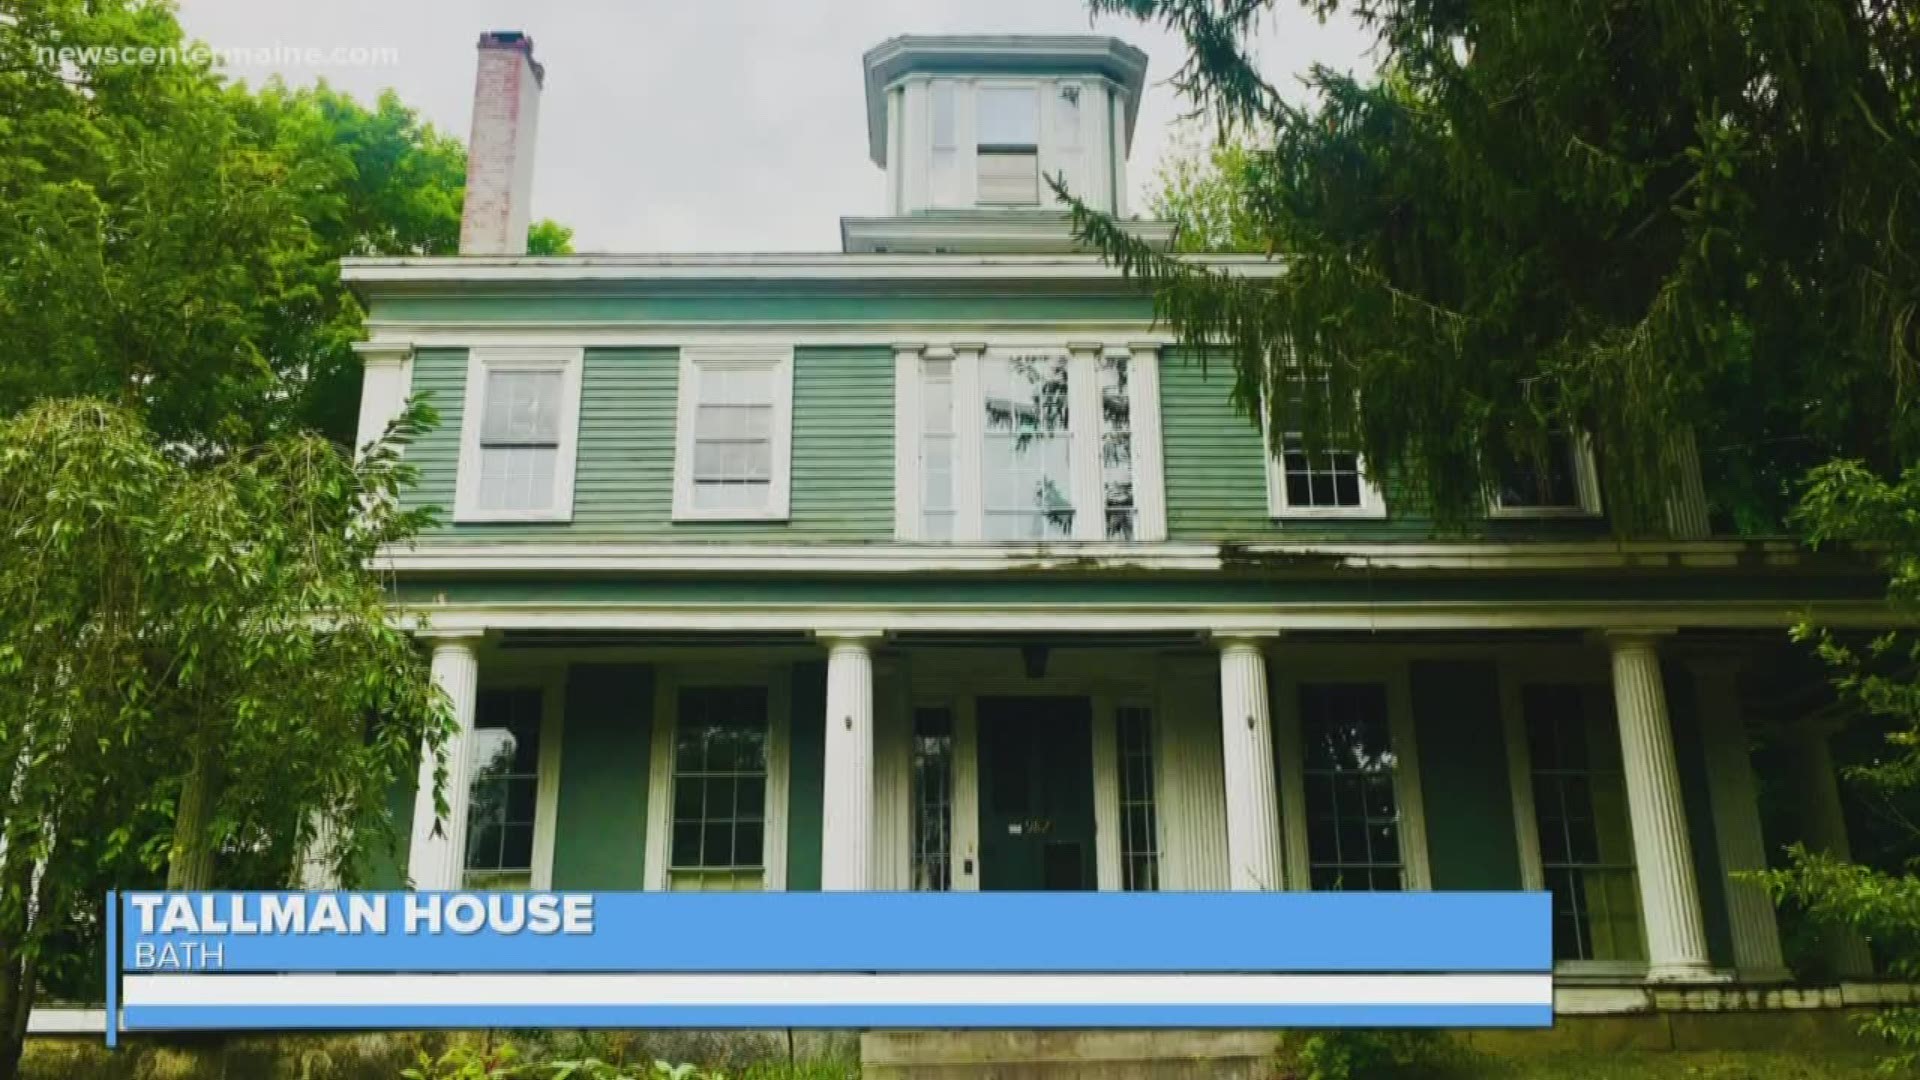 Maine Preservation has released it's 2019 list of Most Endangered Historic Places, hoping to attract interest.